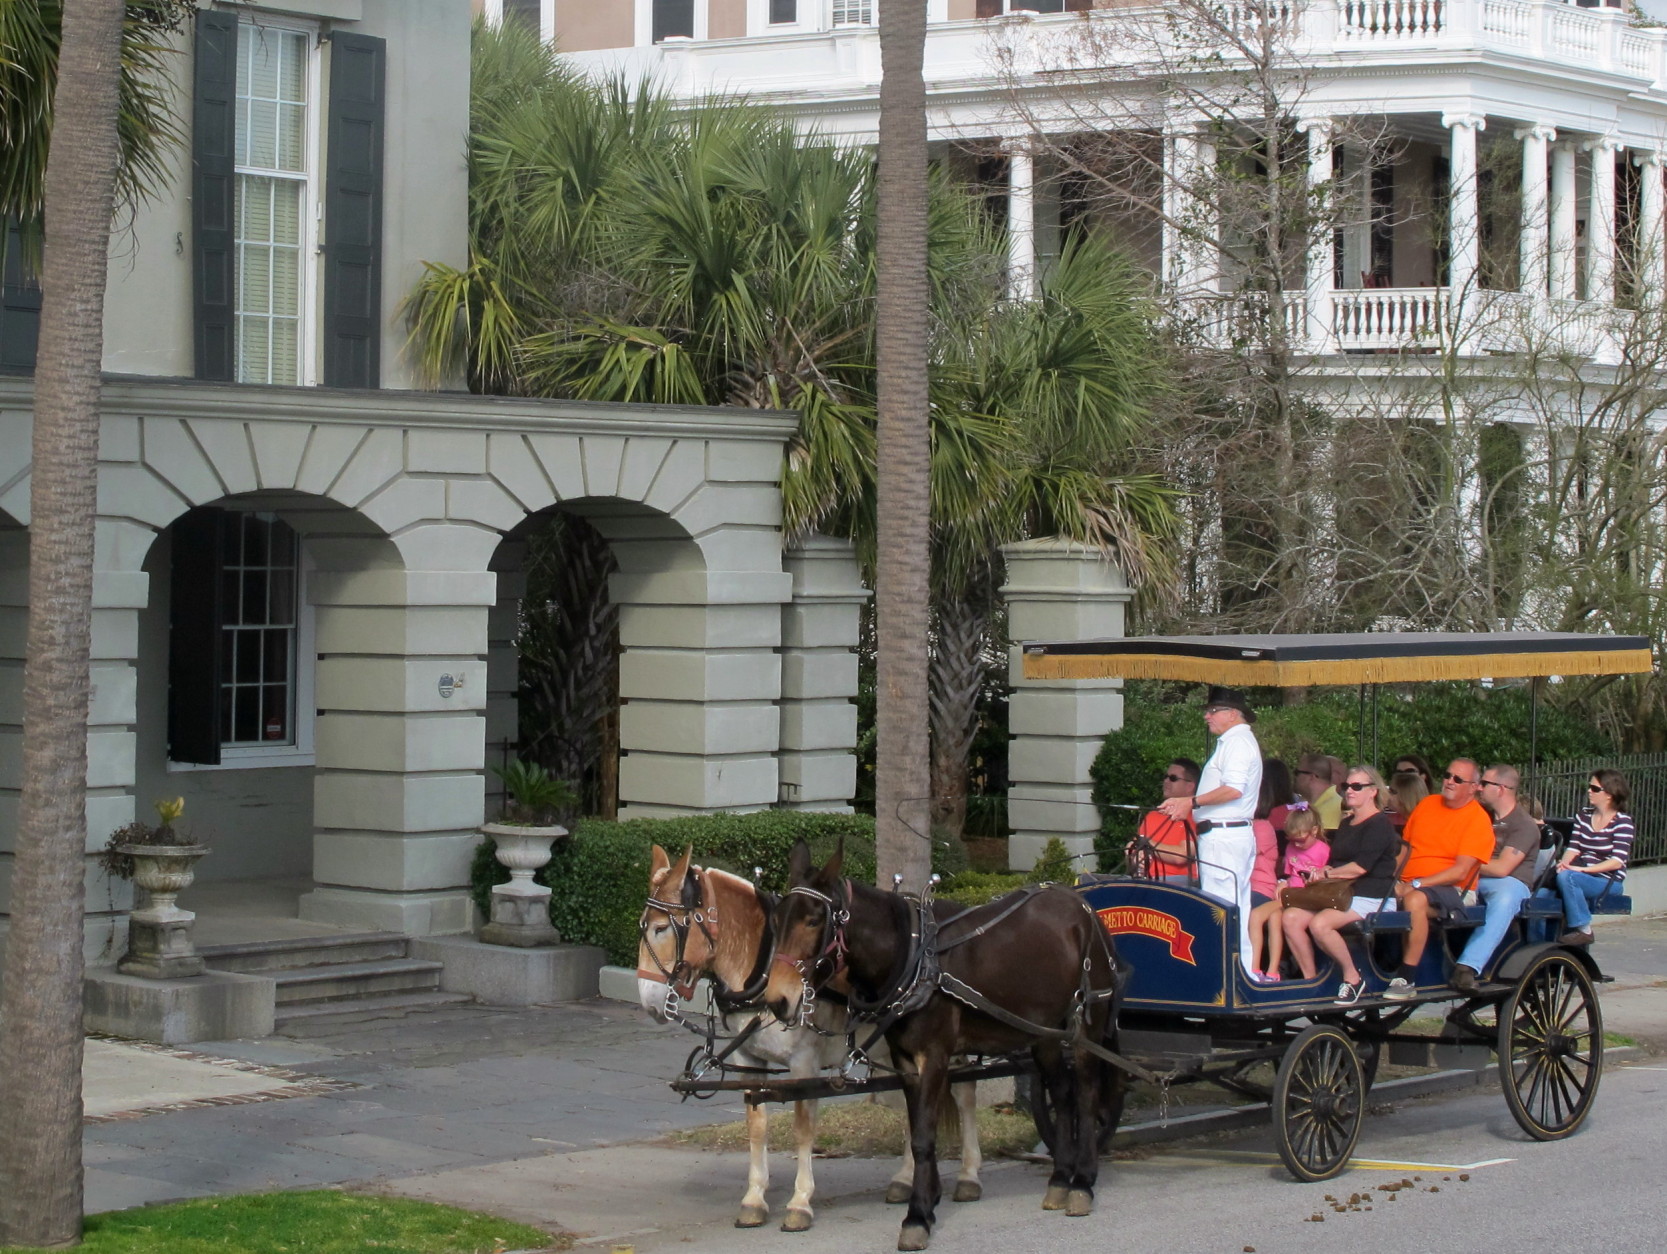 In this Dec. 28, 2014 photo, a carriage pauses in the historic district in in Charleston, S.C. Low gas prices, a thriving economy and renewed consumer confidence are expected to mean a banner season in 2015 for South Carolina's tourism industry. (AP Photo/Bruce Smith)